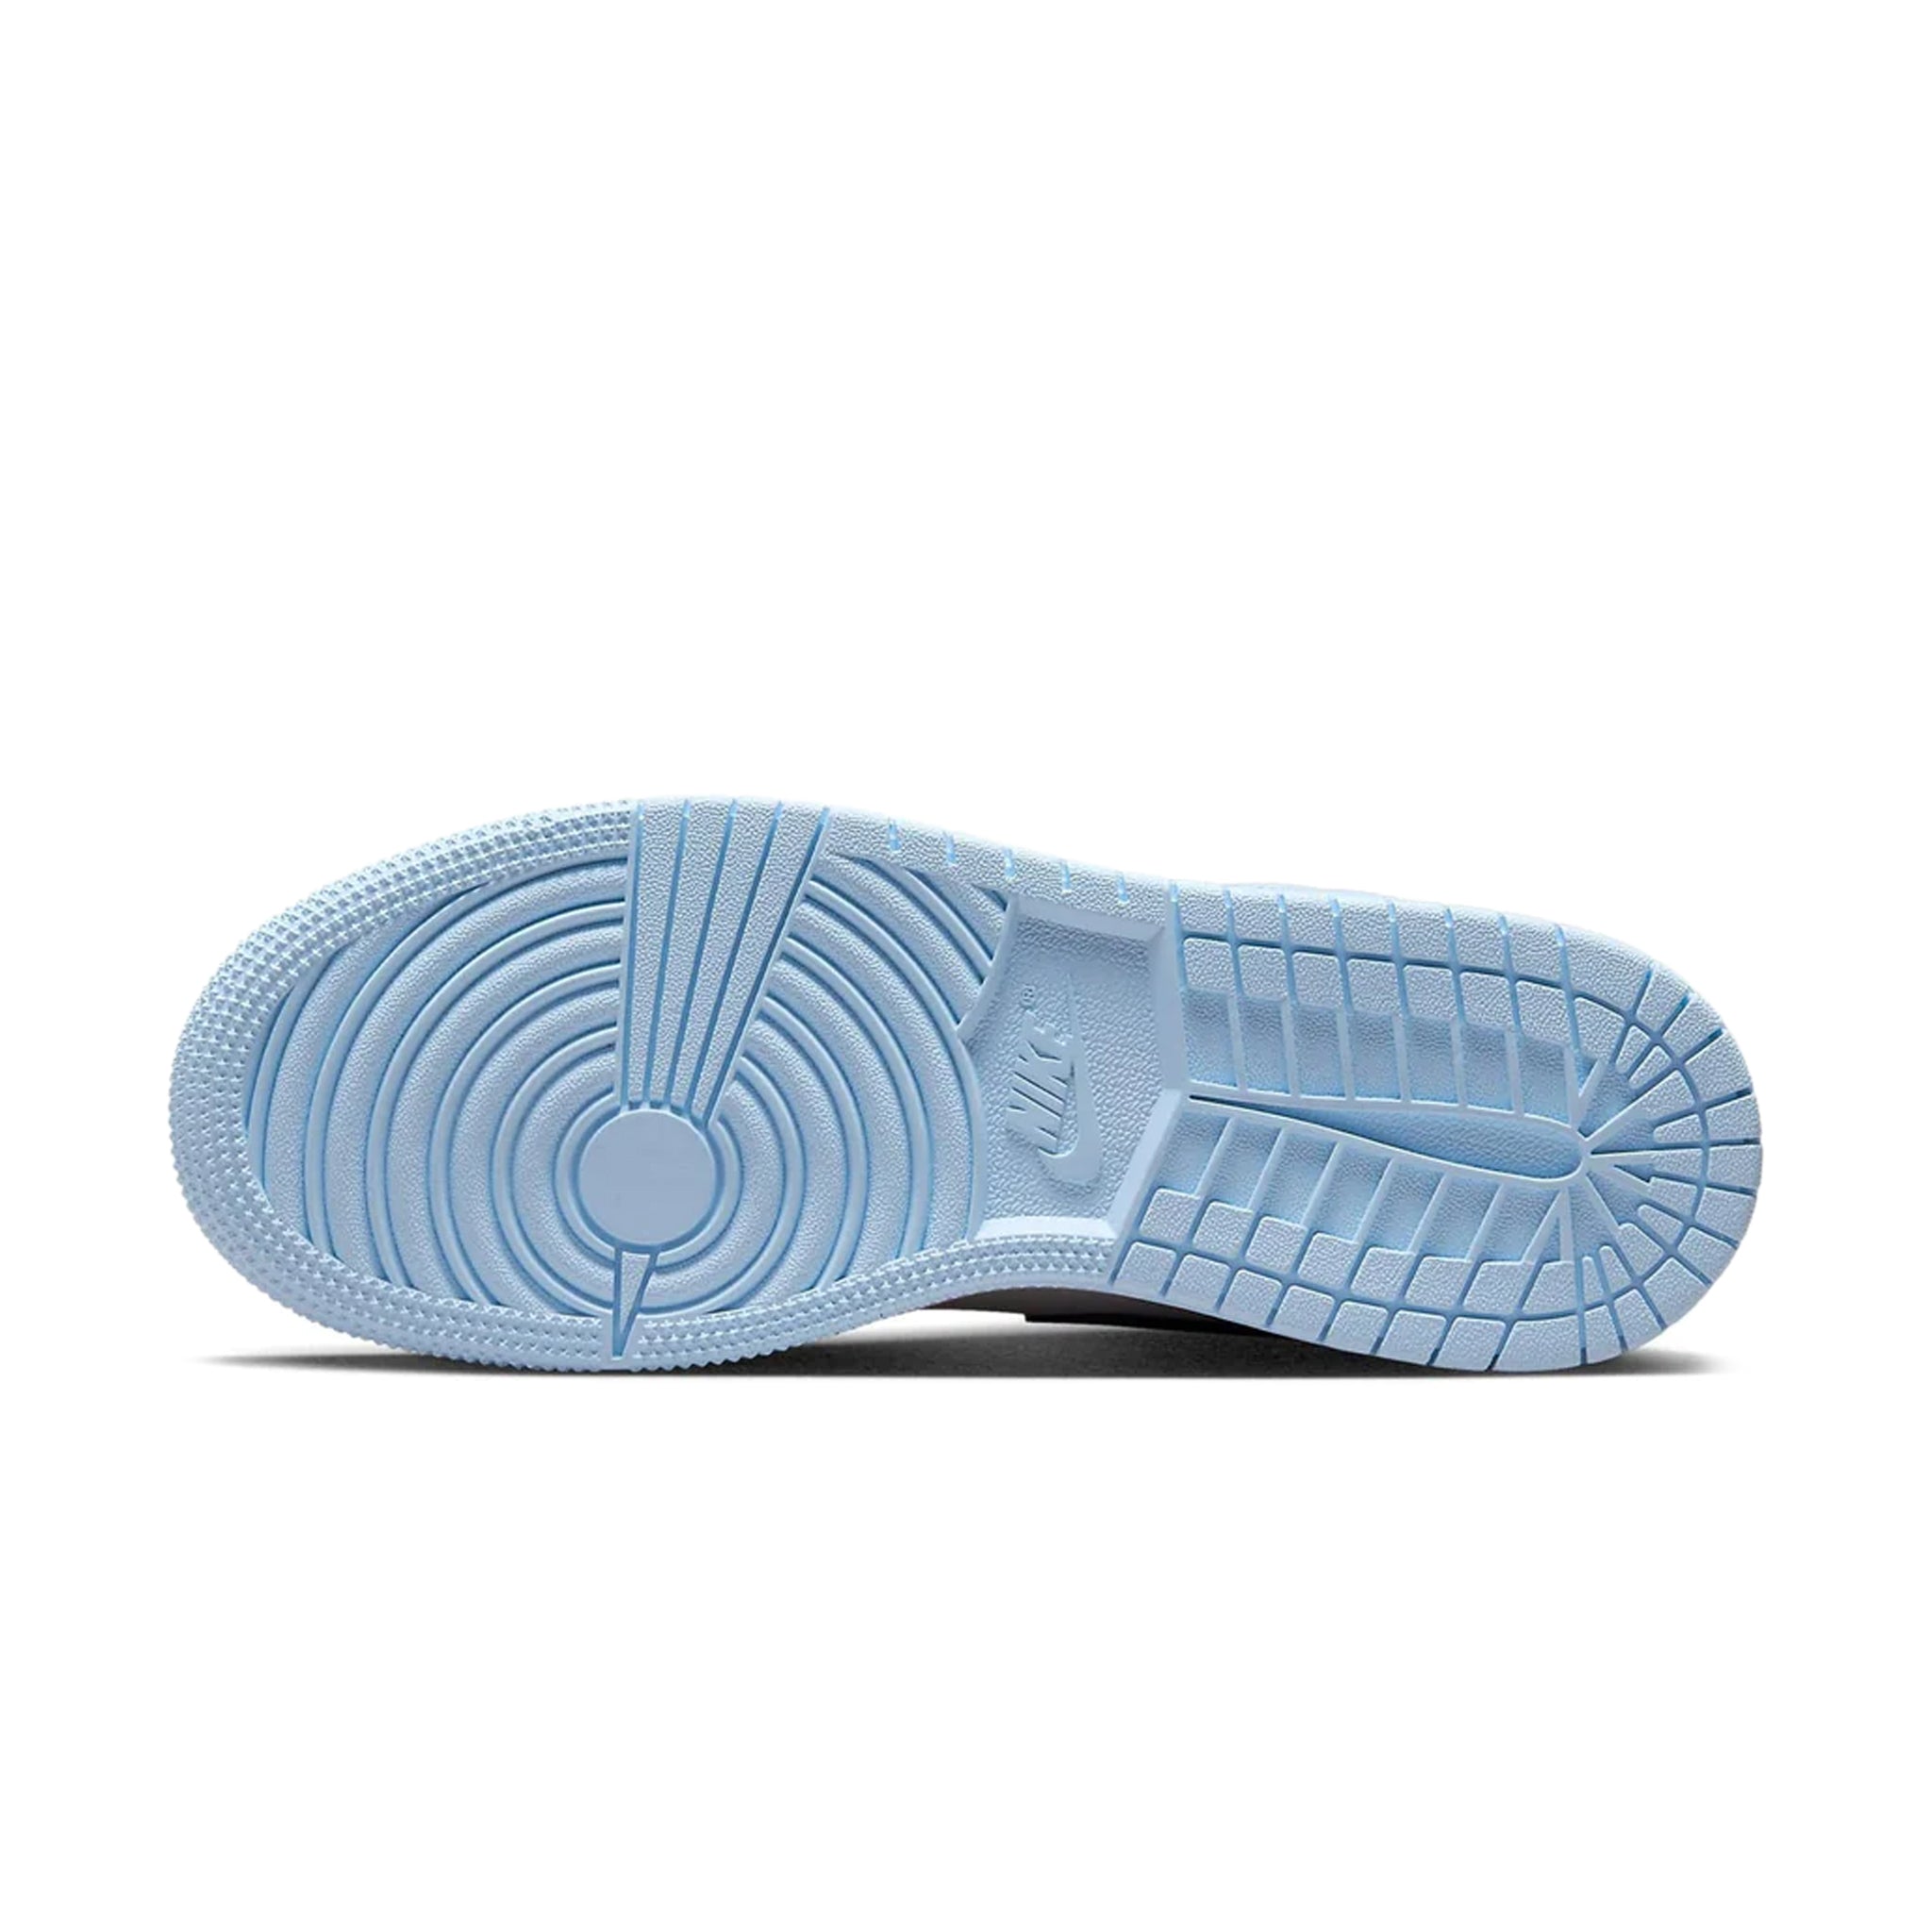 Sole view of Air Jordan 1 Mid Ice Blue (GS) 555112-401